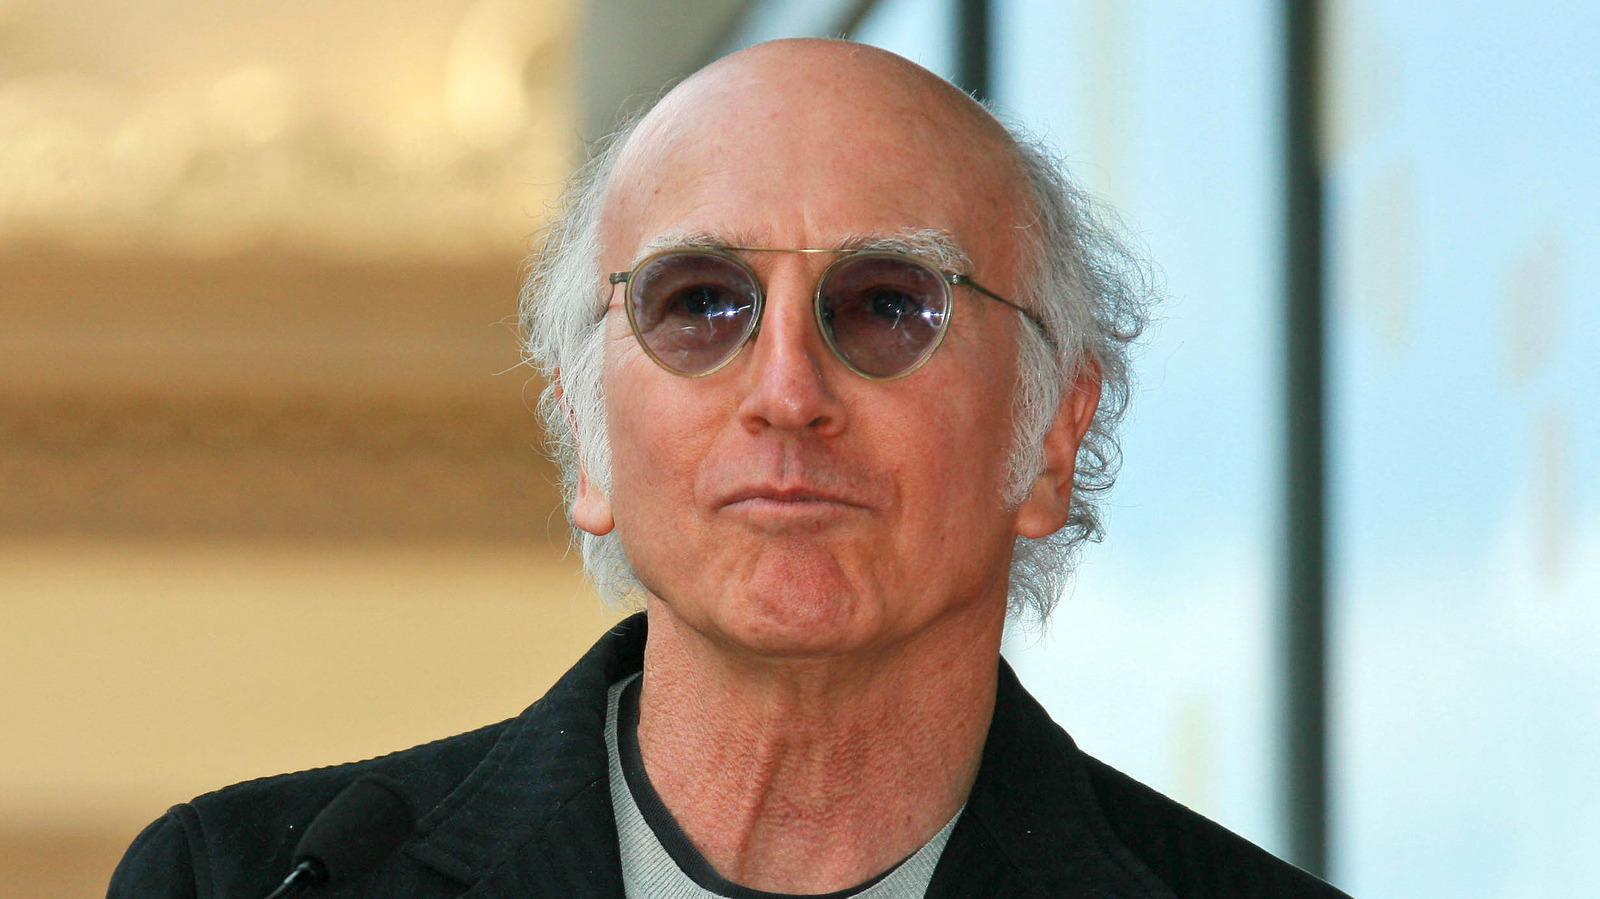 larry david crypto currency